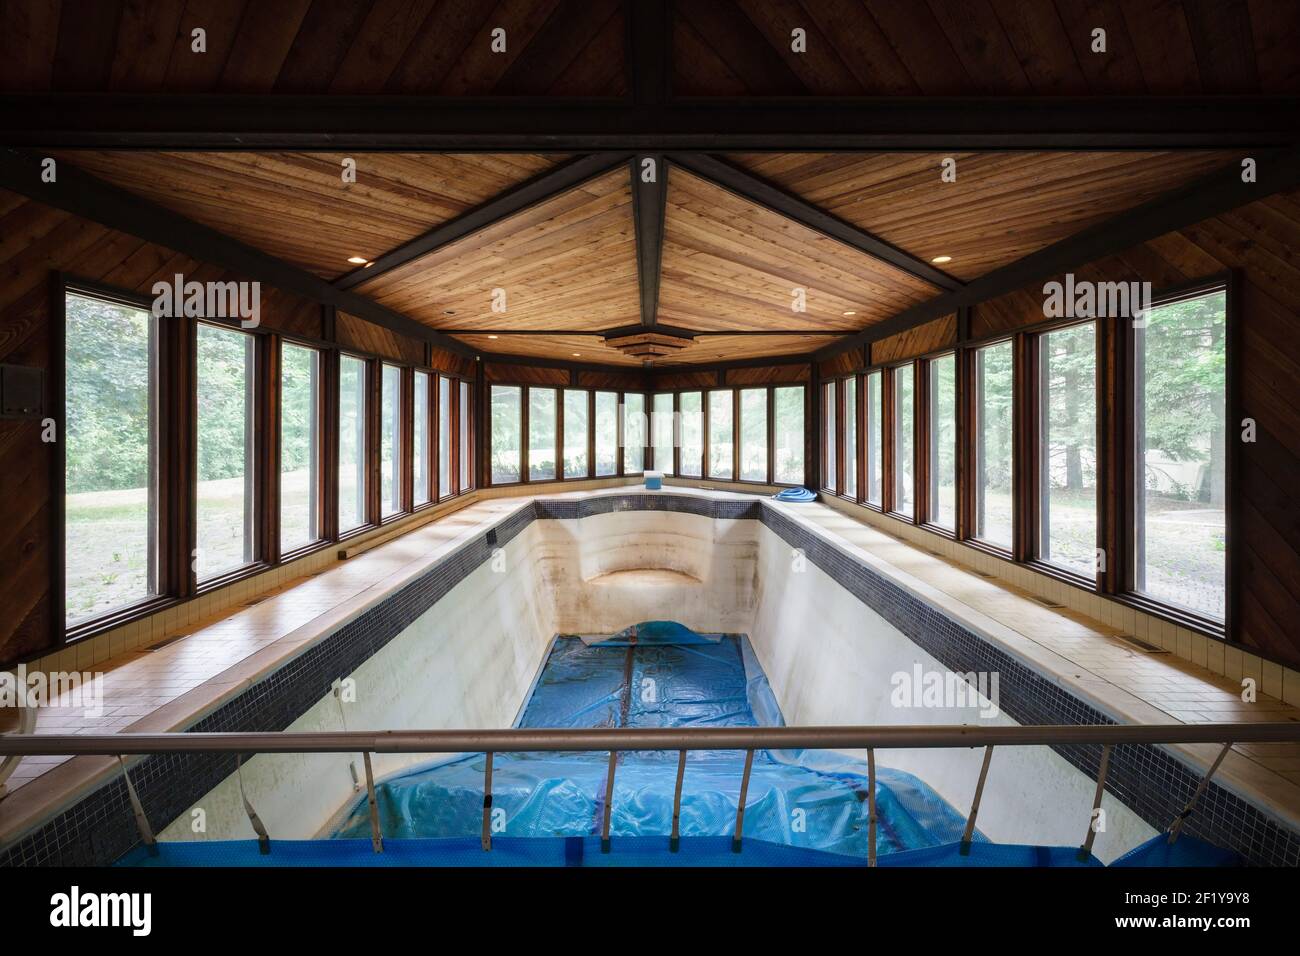 An indoor swimming pool inside of an abandoned mansion. Stock Photo